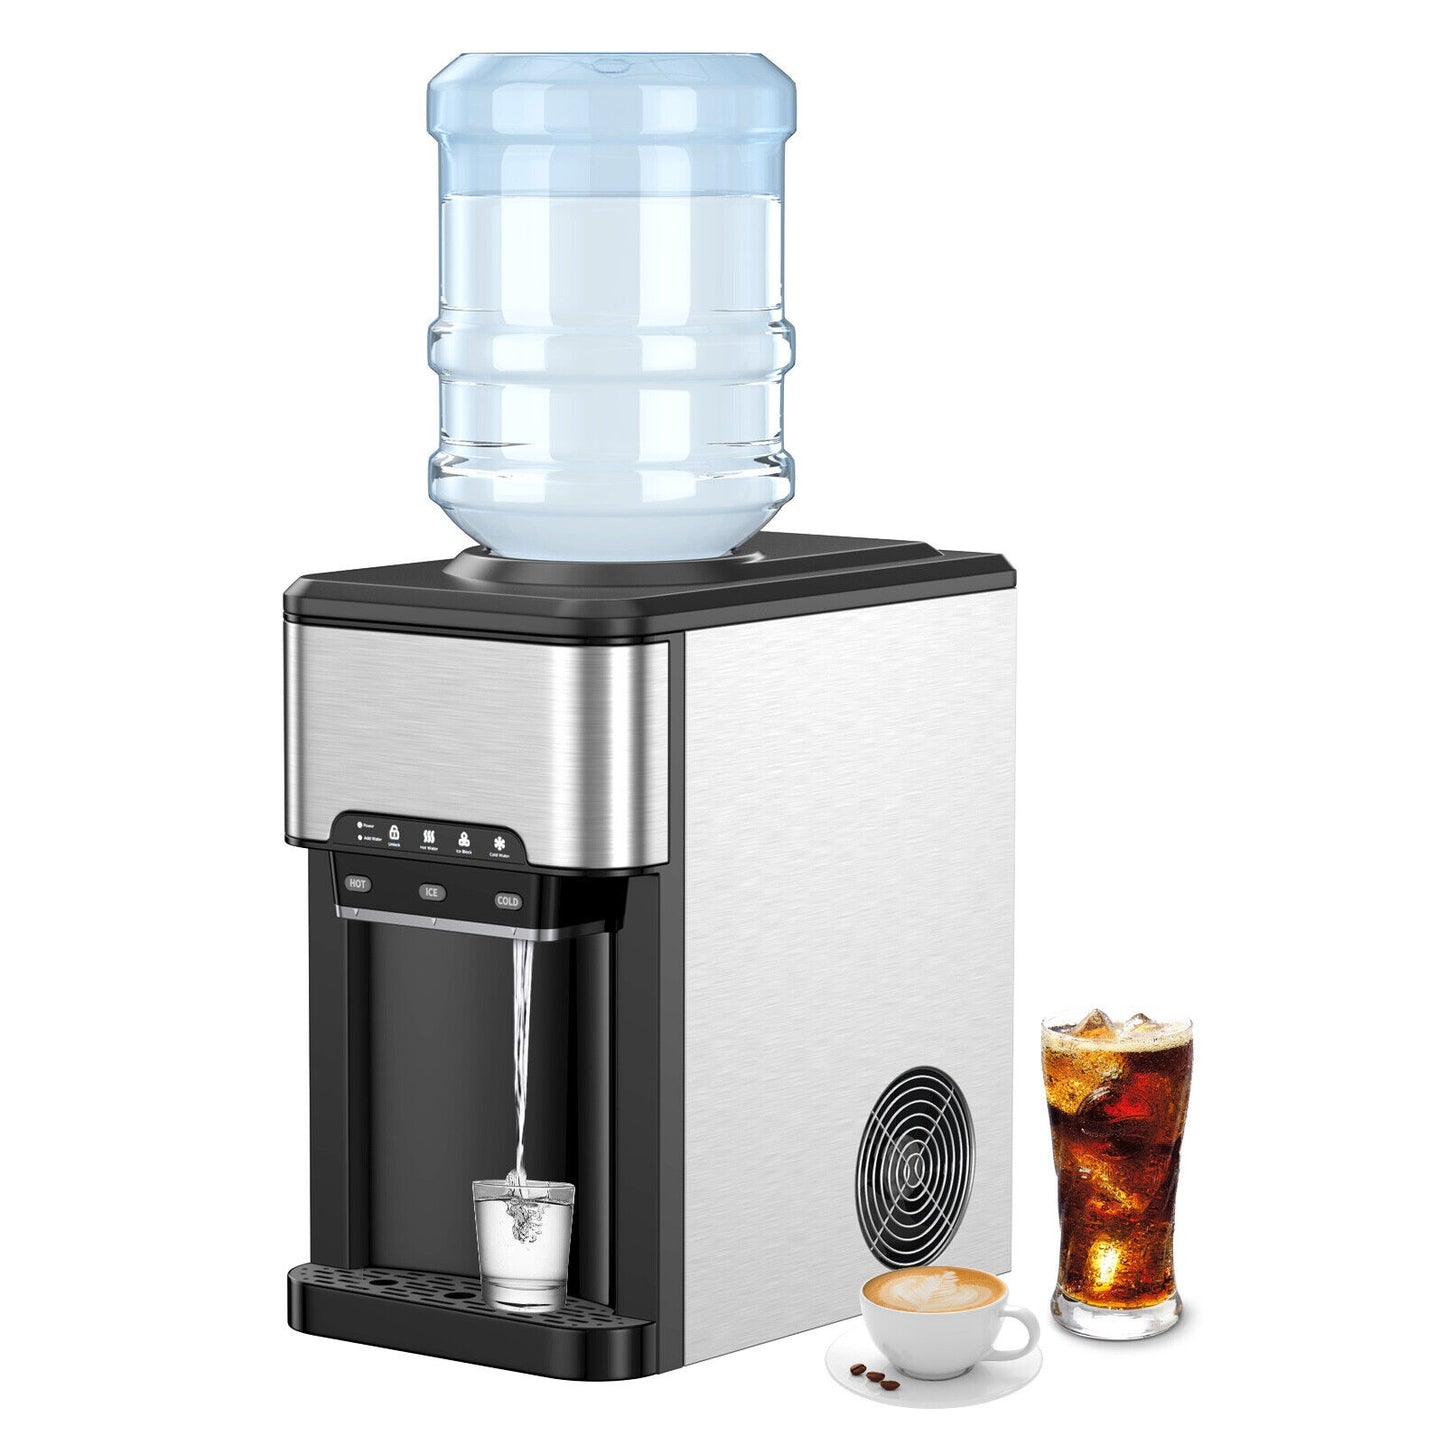 3-in-1 Water Cooler Dispenser with Built-in Ice Maker and 3 Temperature Settings-Silver